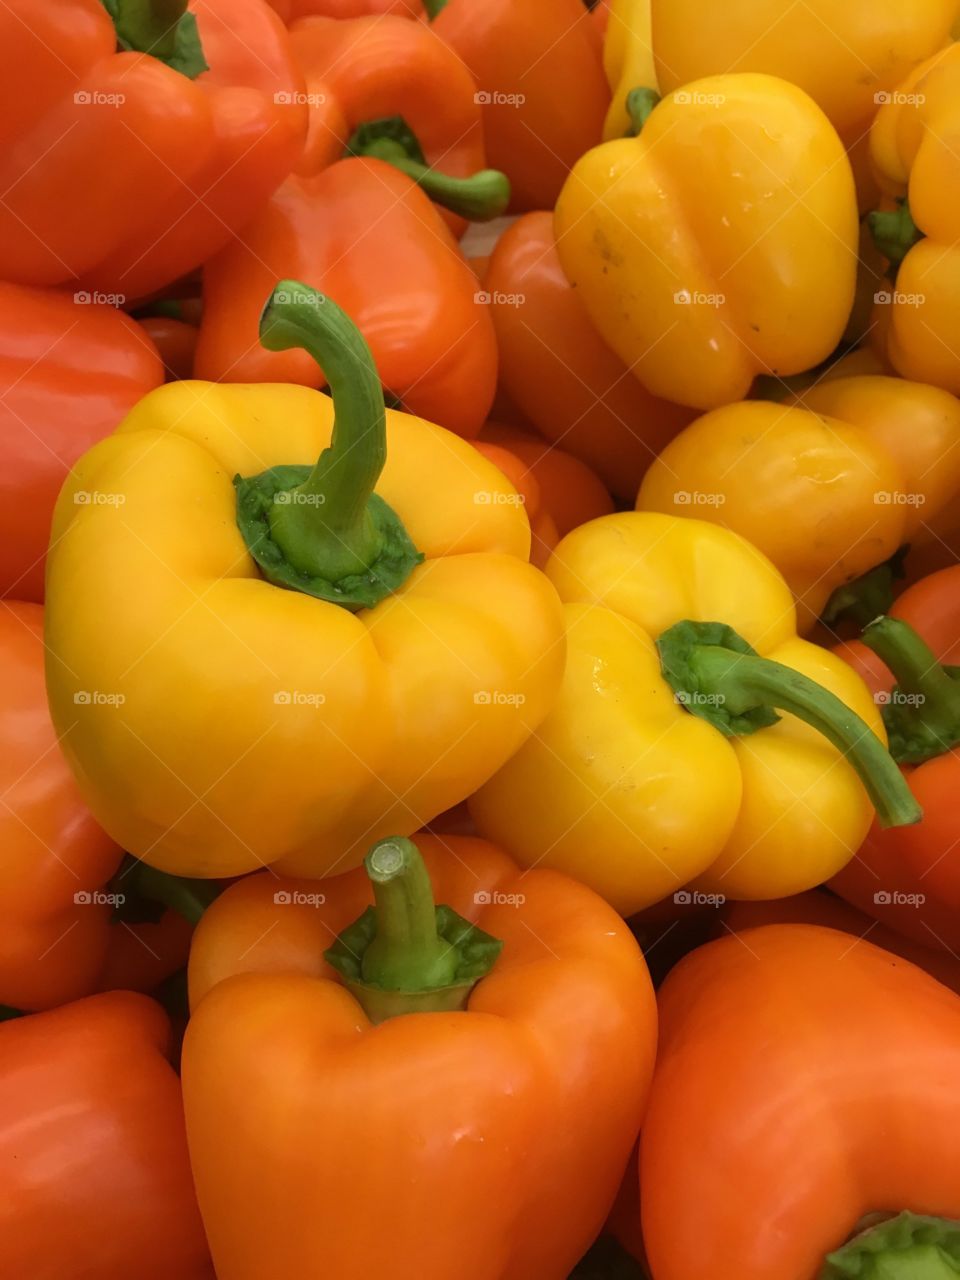 Healthy eating - yellow paprika